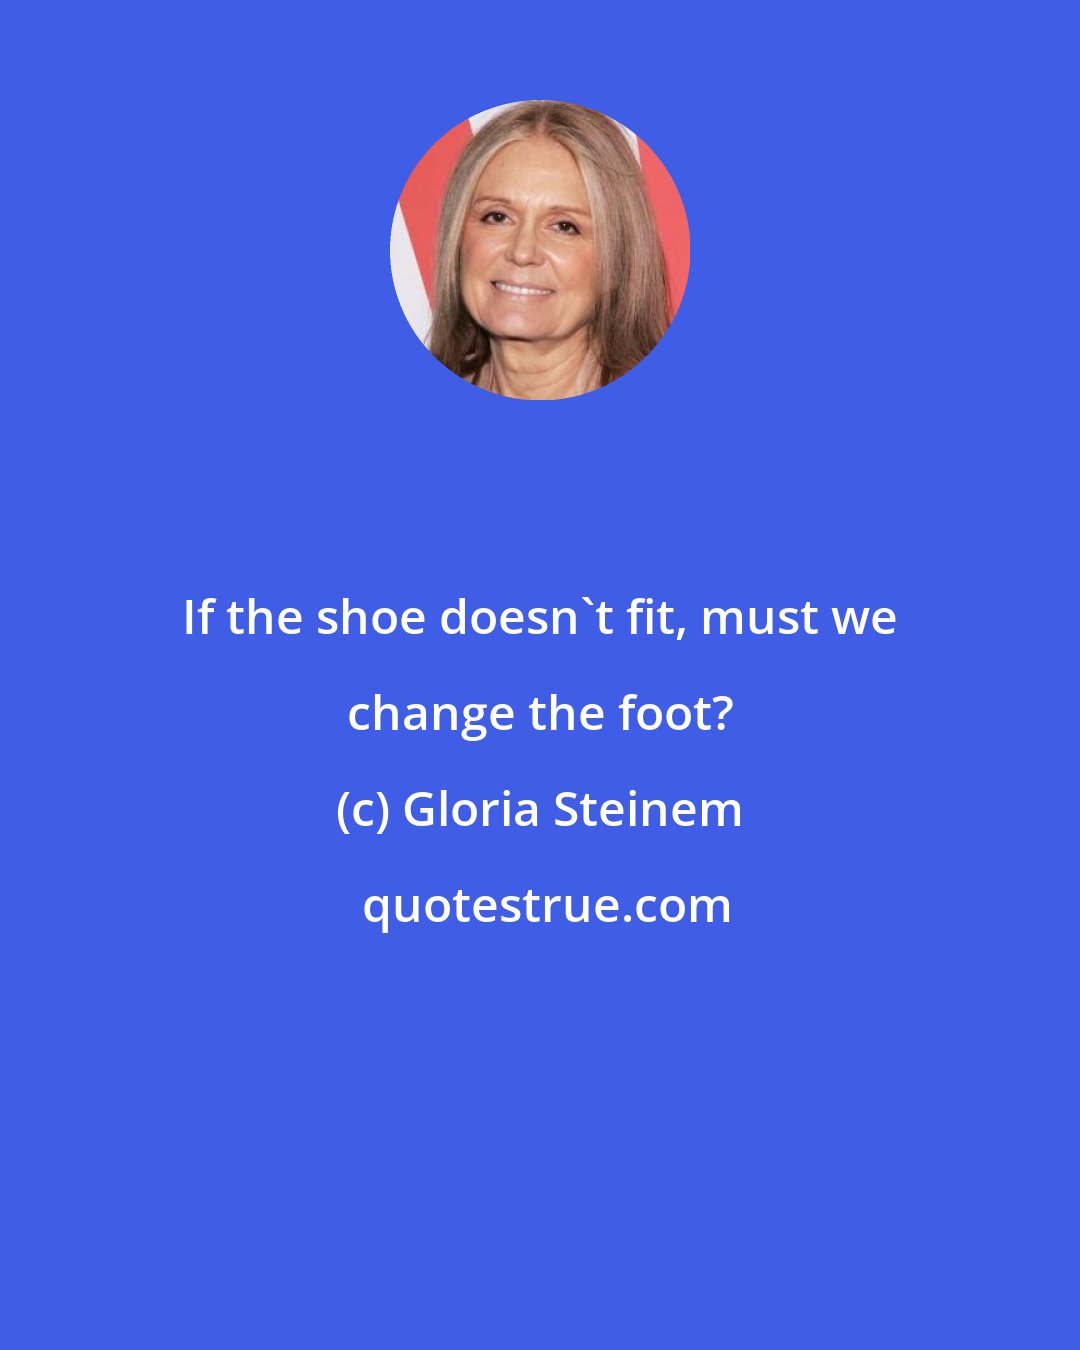 Gloria Steinem: If the shoe doesn't fit, must we change the foot?